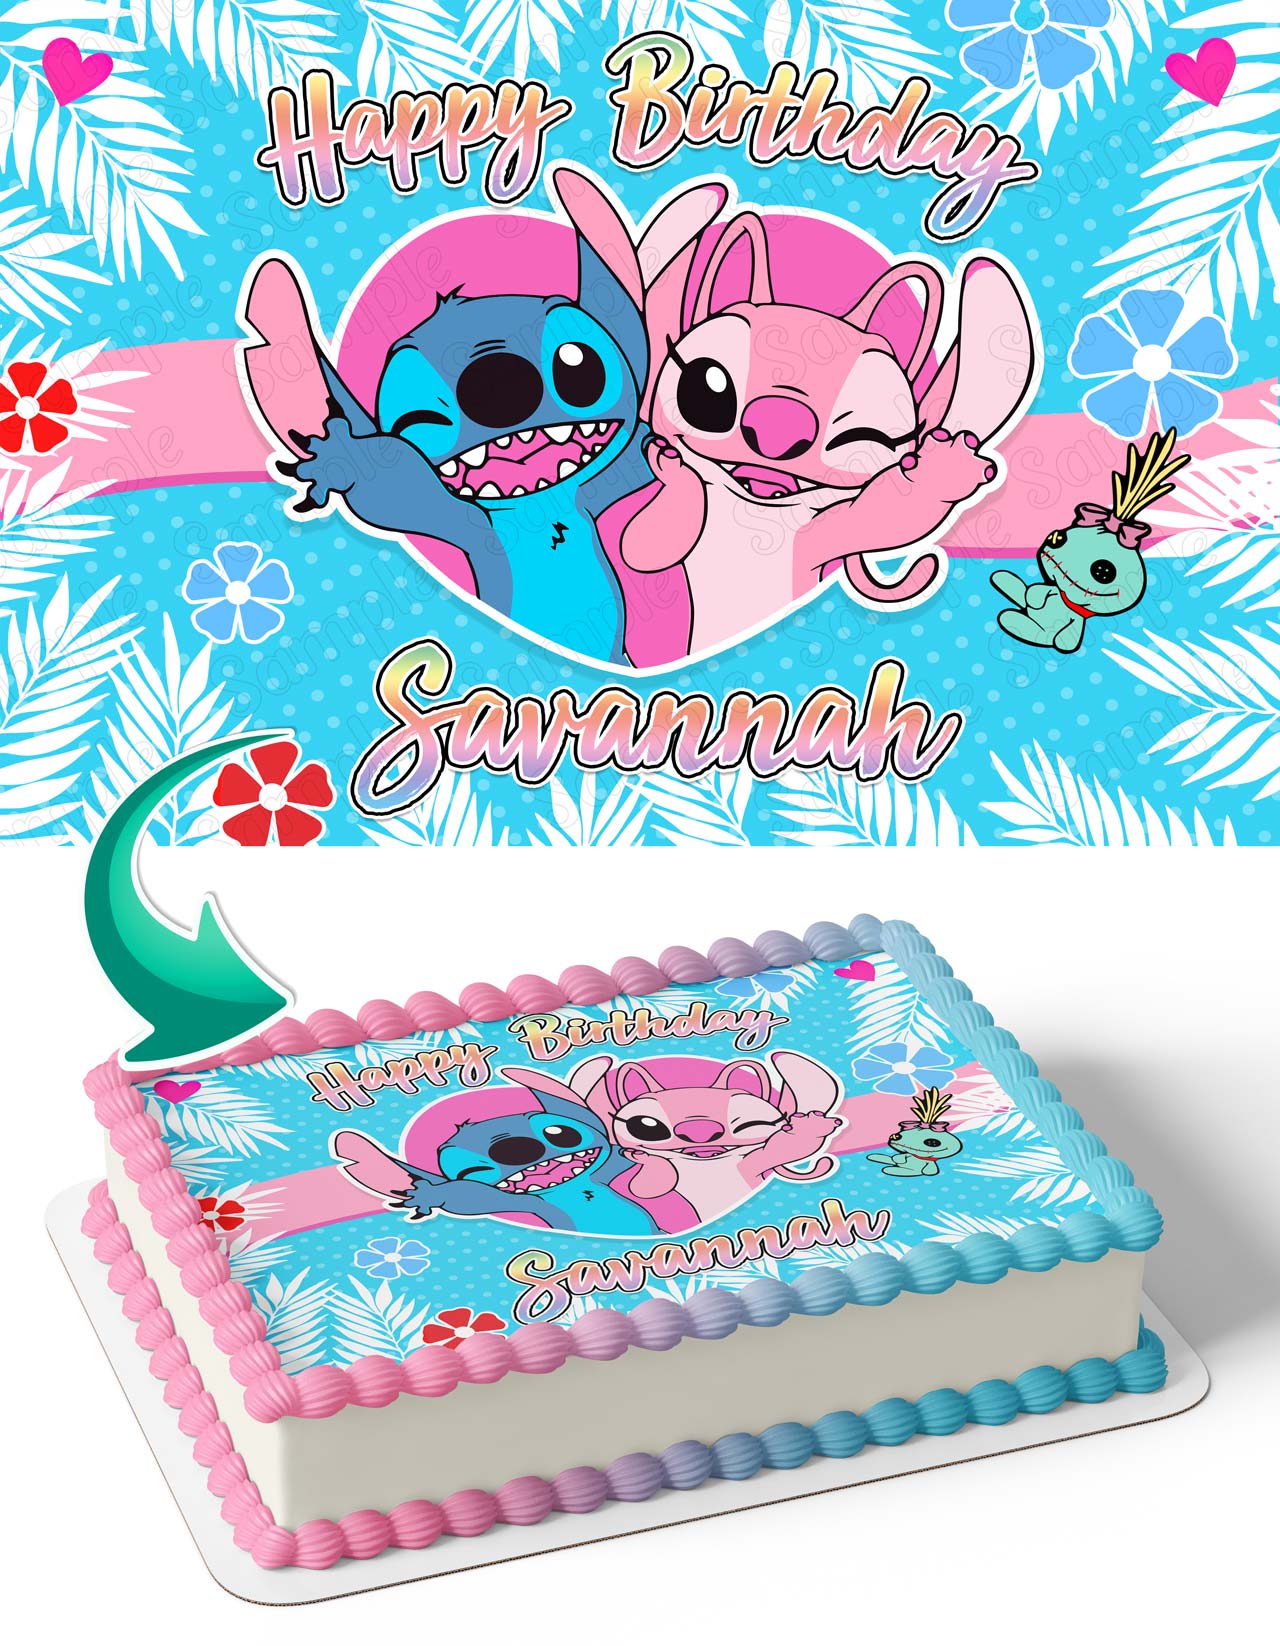 Stitch with Flowers from Lilo and Stitch Edible Cake Topper Image ABPID51026